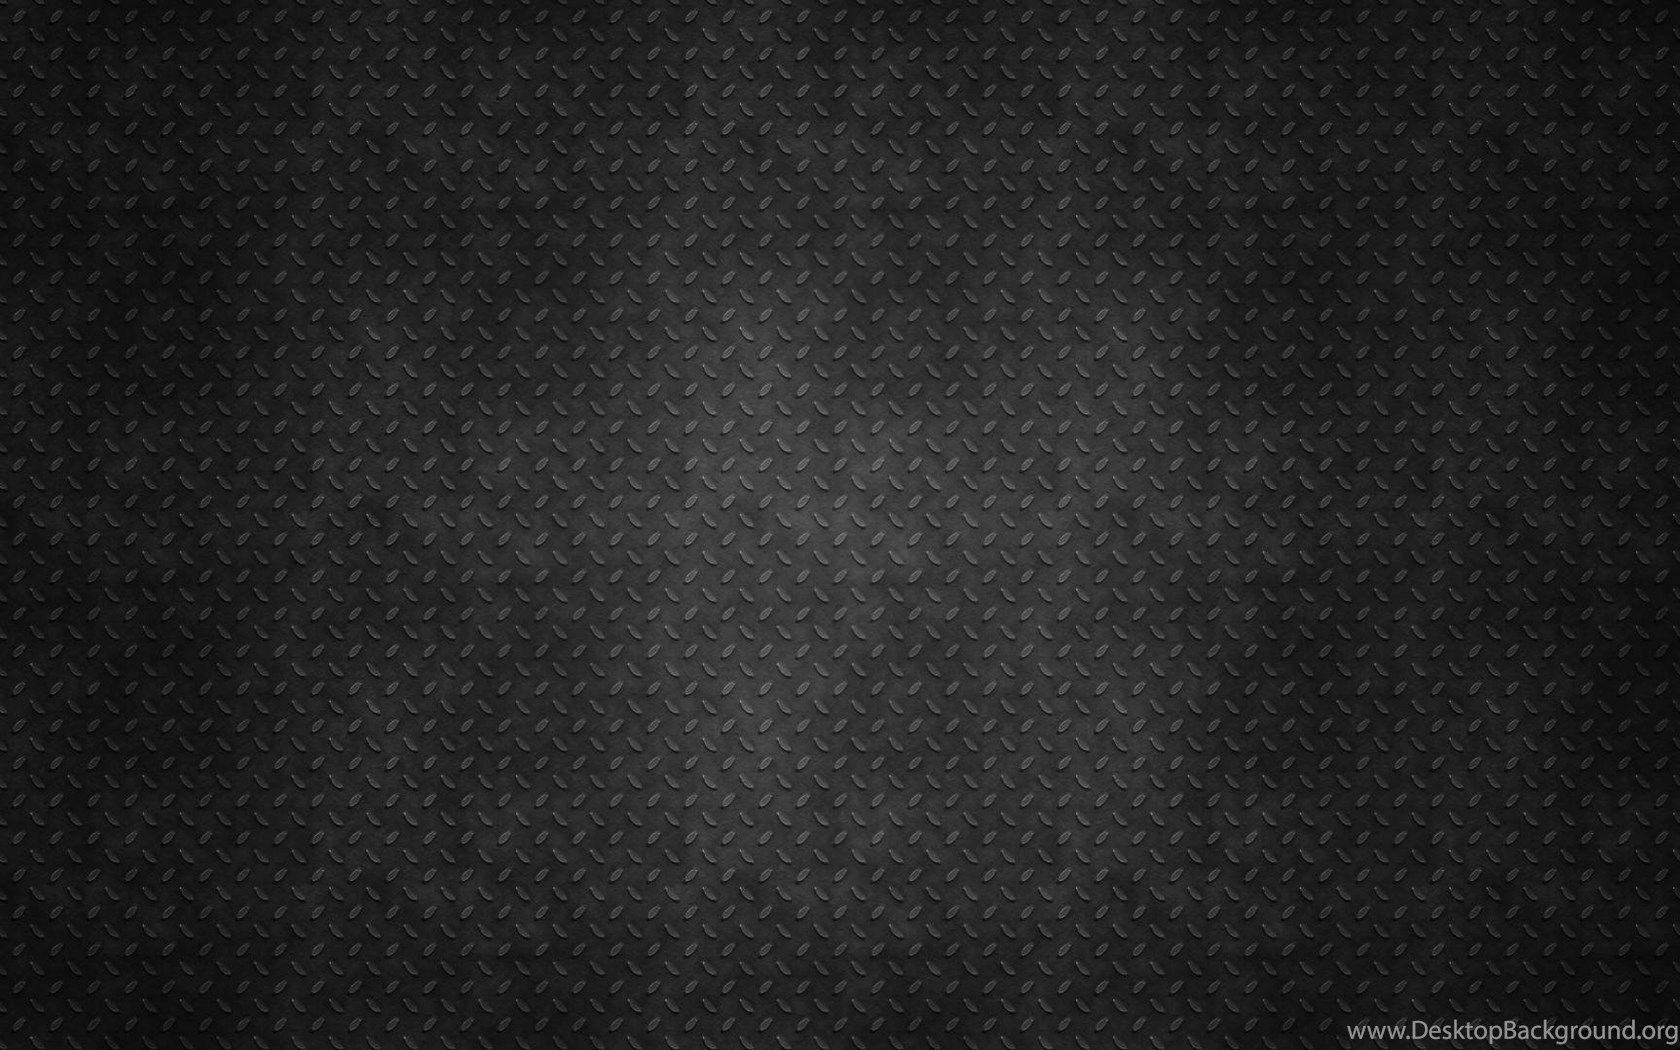 Wallpaper Brushed Steel Texture P HD Xpx Px Free 1920x1080